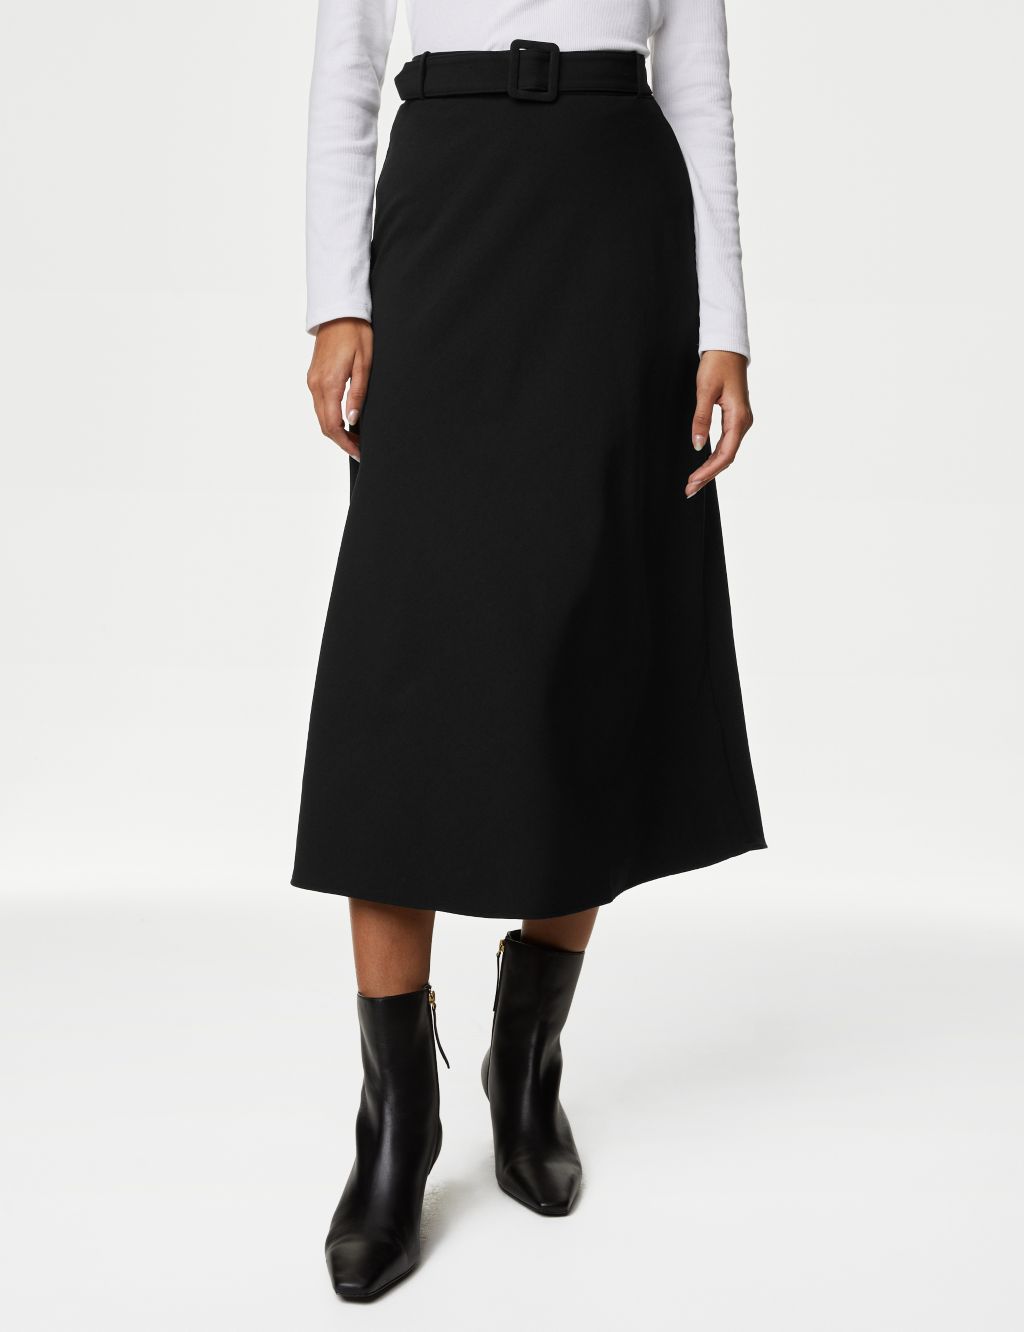 Belted Midaxi A-Line Skirt image 4